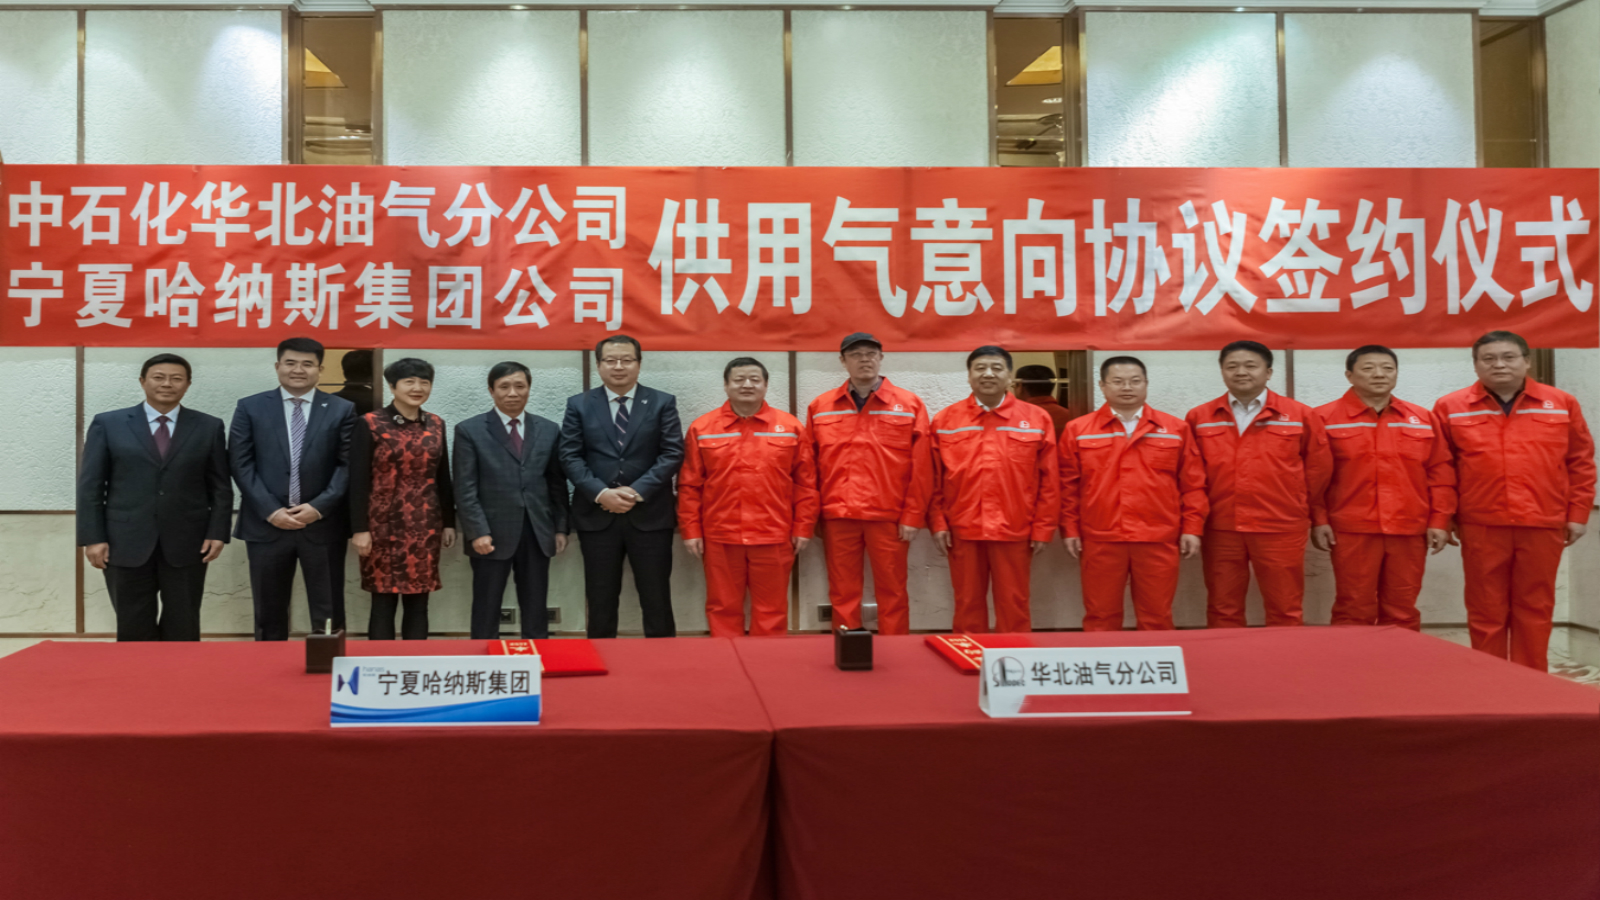 Signing ceremony between SINOPEC North China Branch and Hanas Group was rounded off